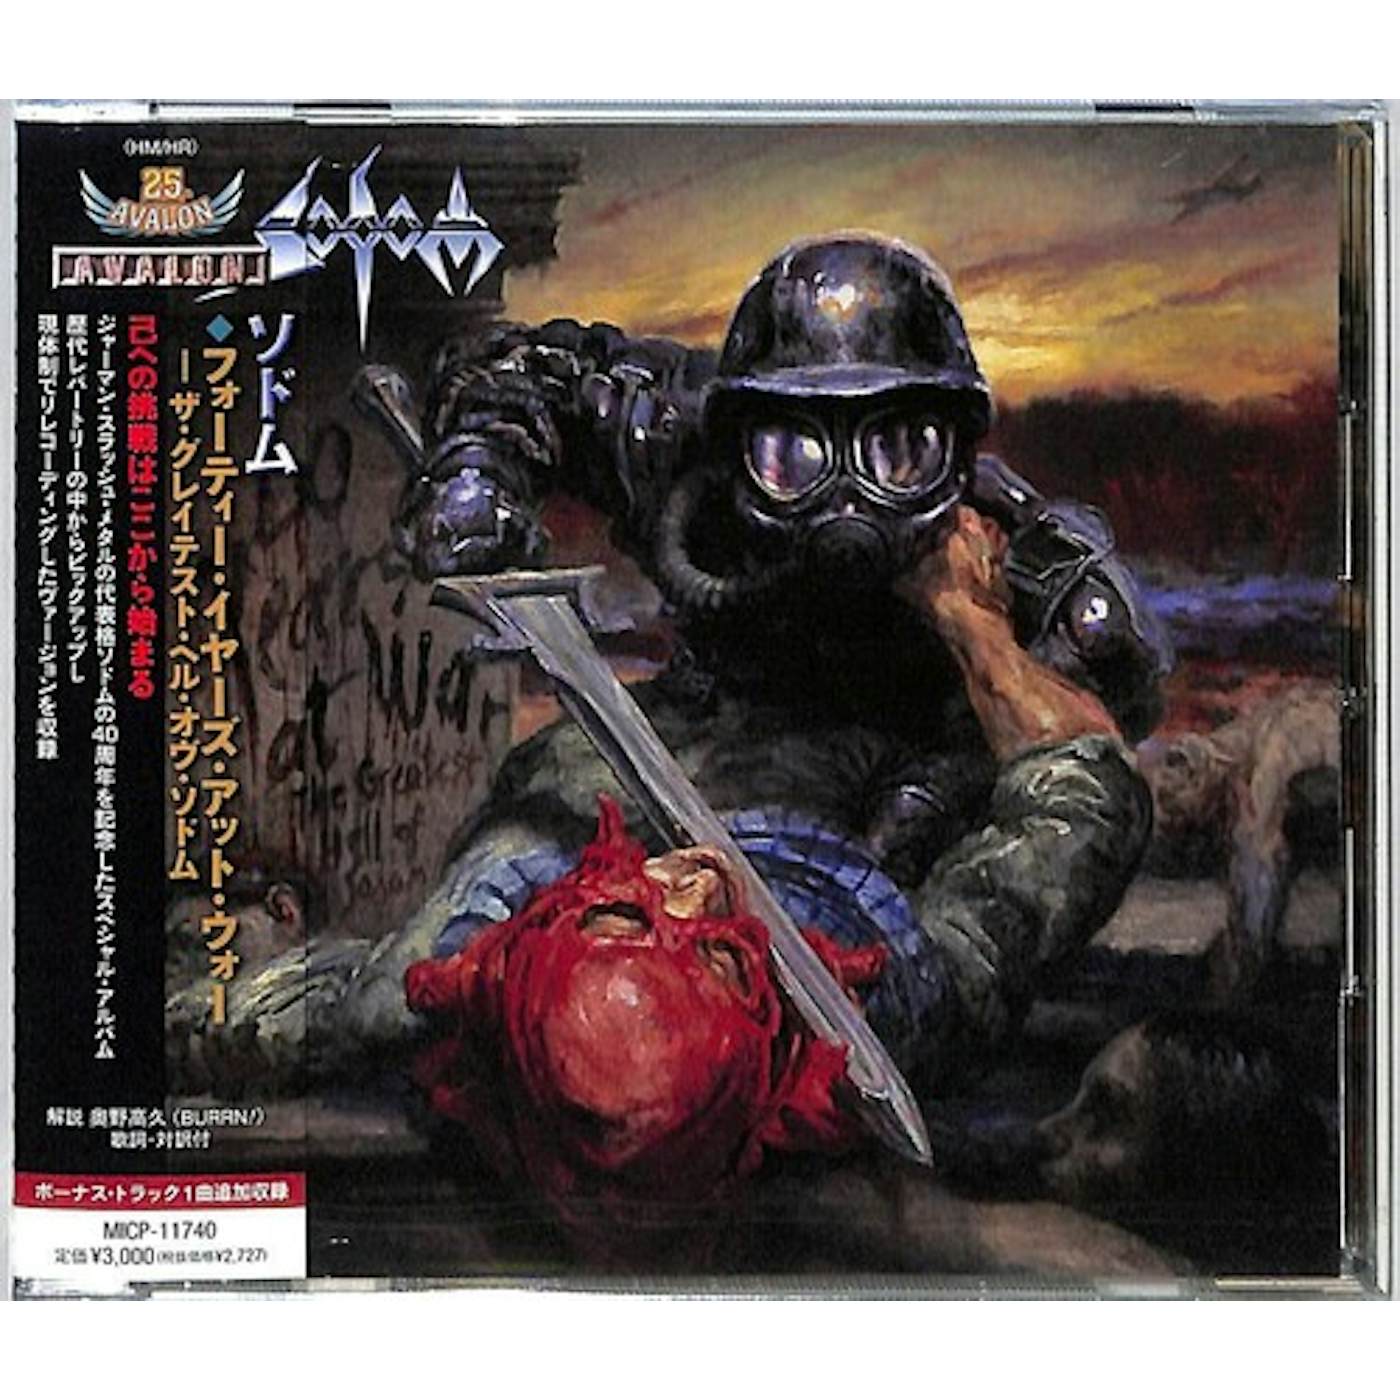 40 YEARS AT WAR: THE GREATEST HELL OF SODOM CD